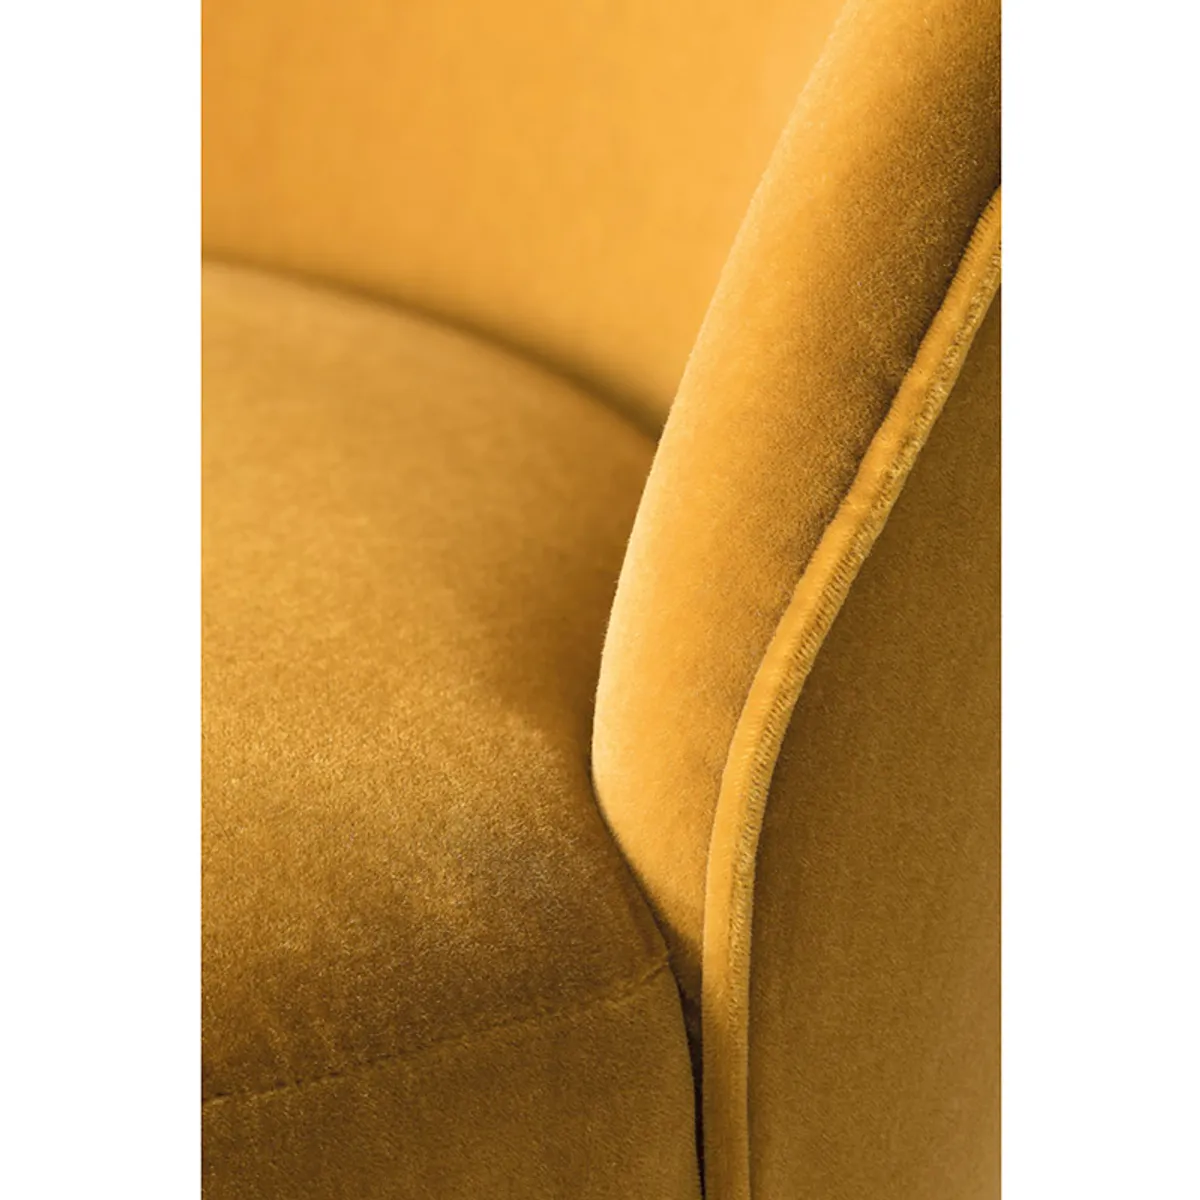 Shirley Lounge Chair Yellow Upholstery And Wooden Legs Insideoutcontracts 6